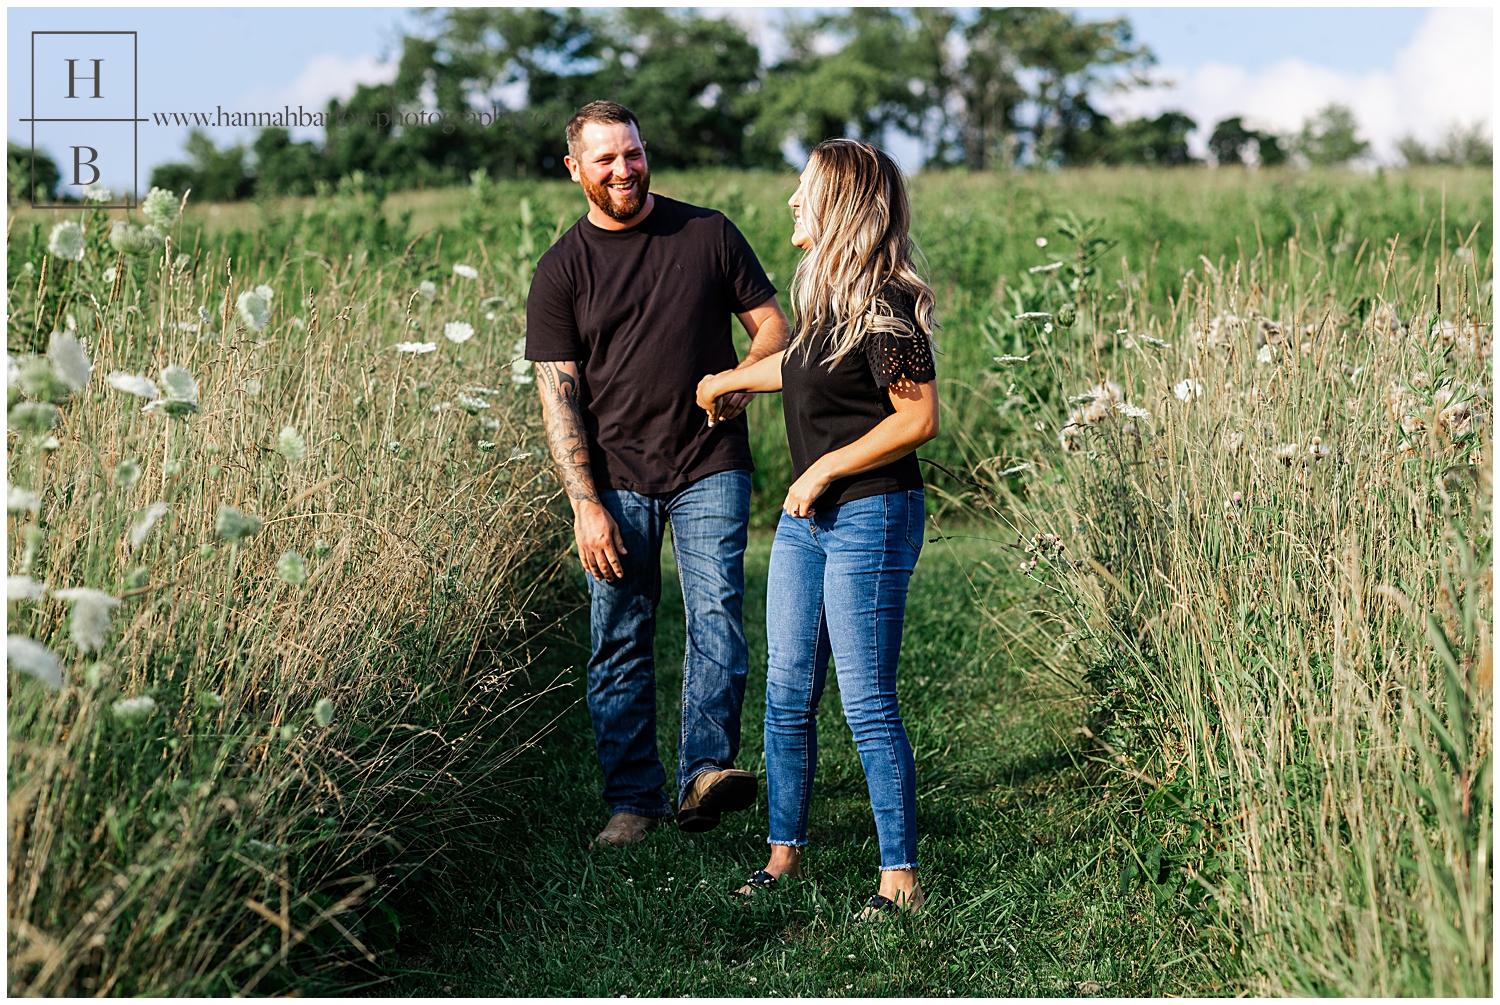 Couple laughs in field wearing black for their engagement photos.